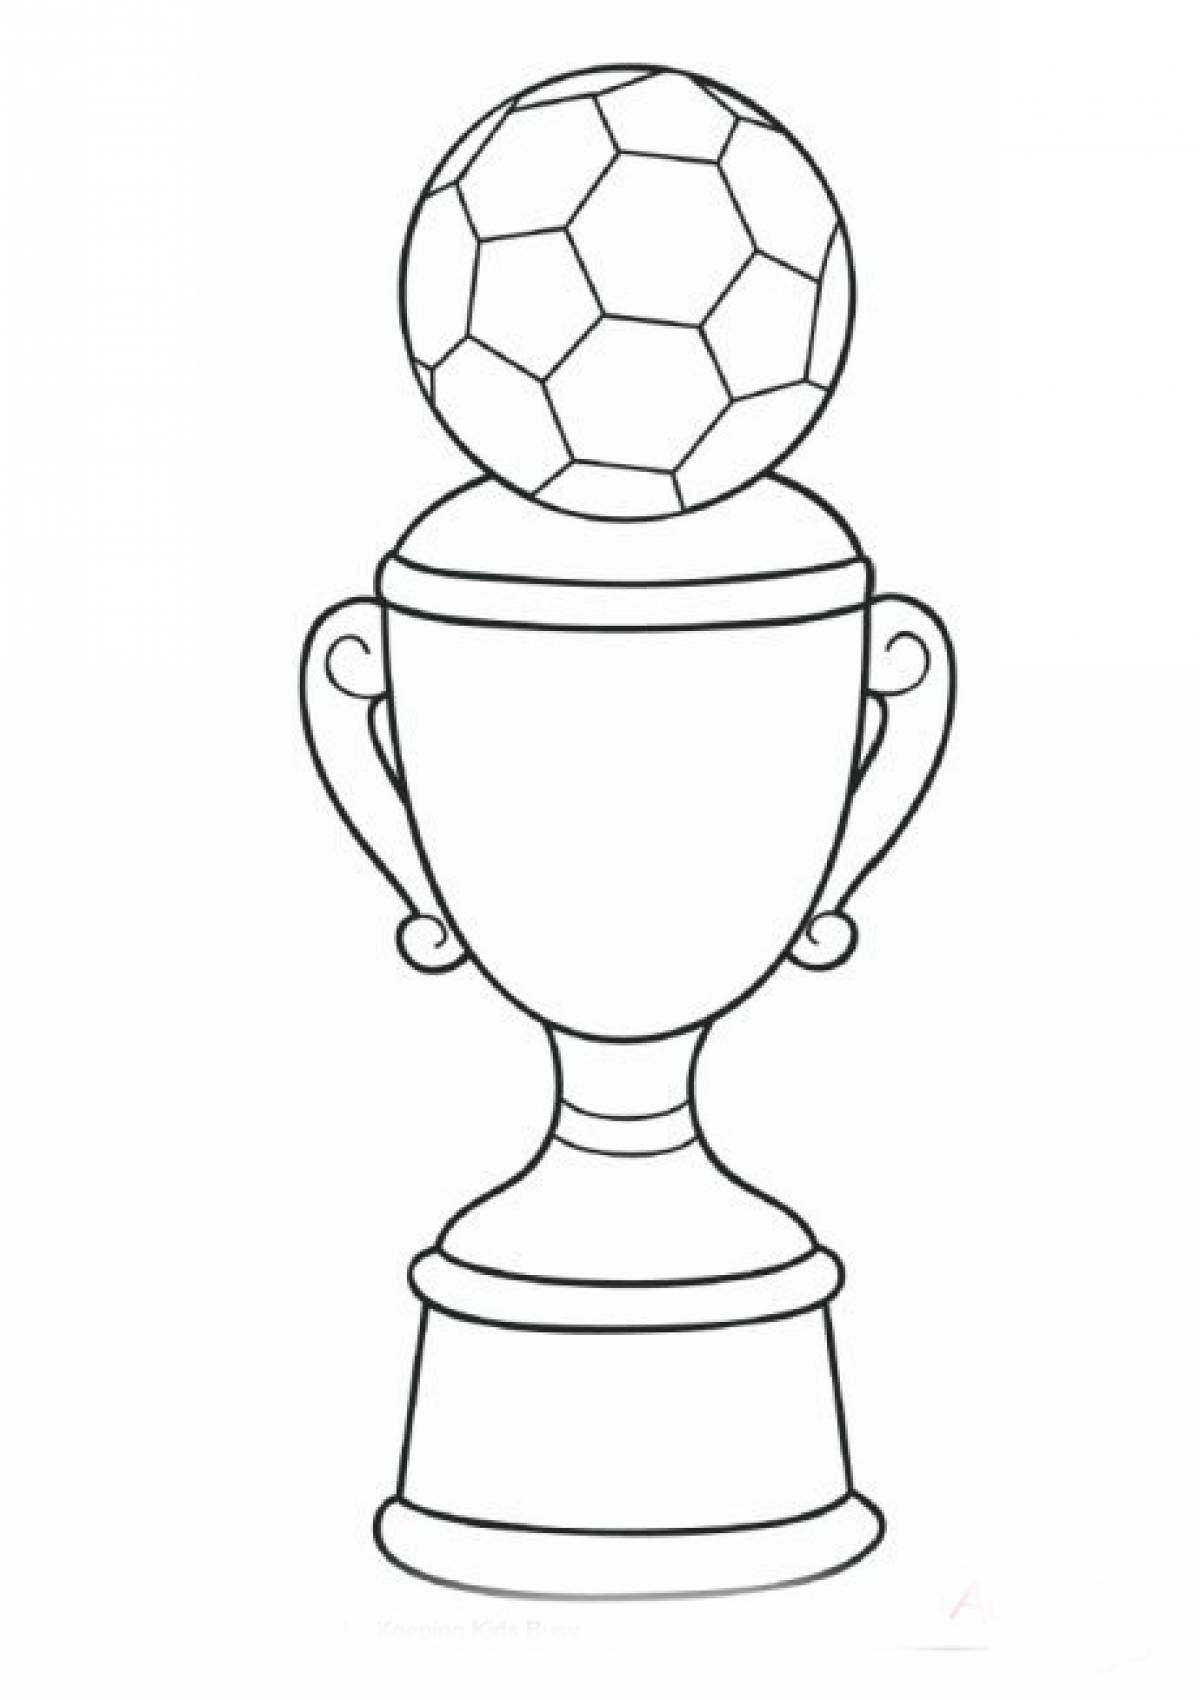 Cup with ball